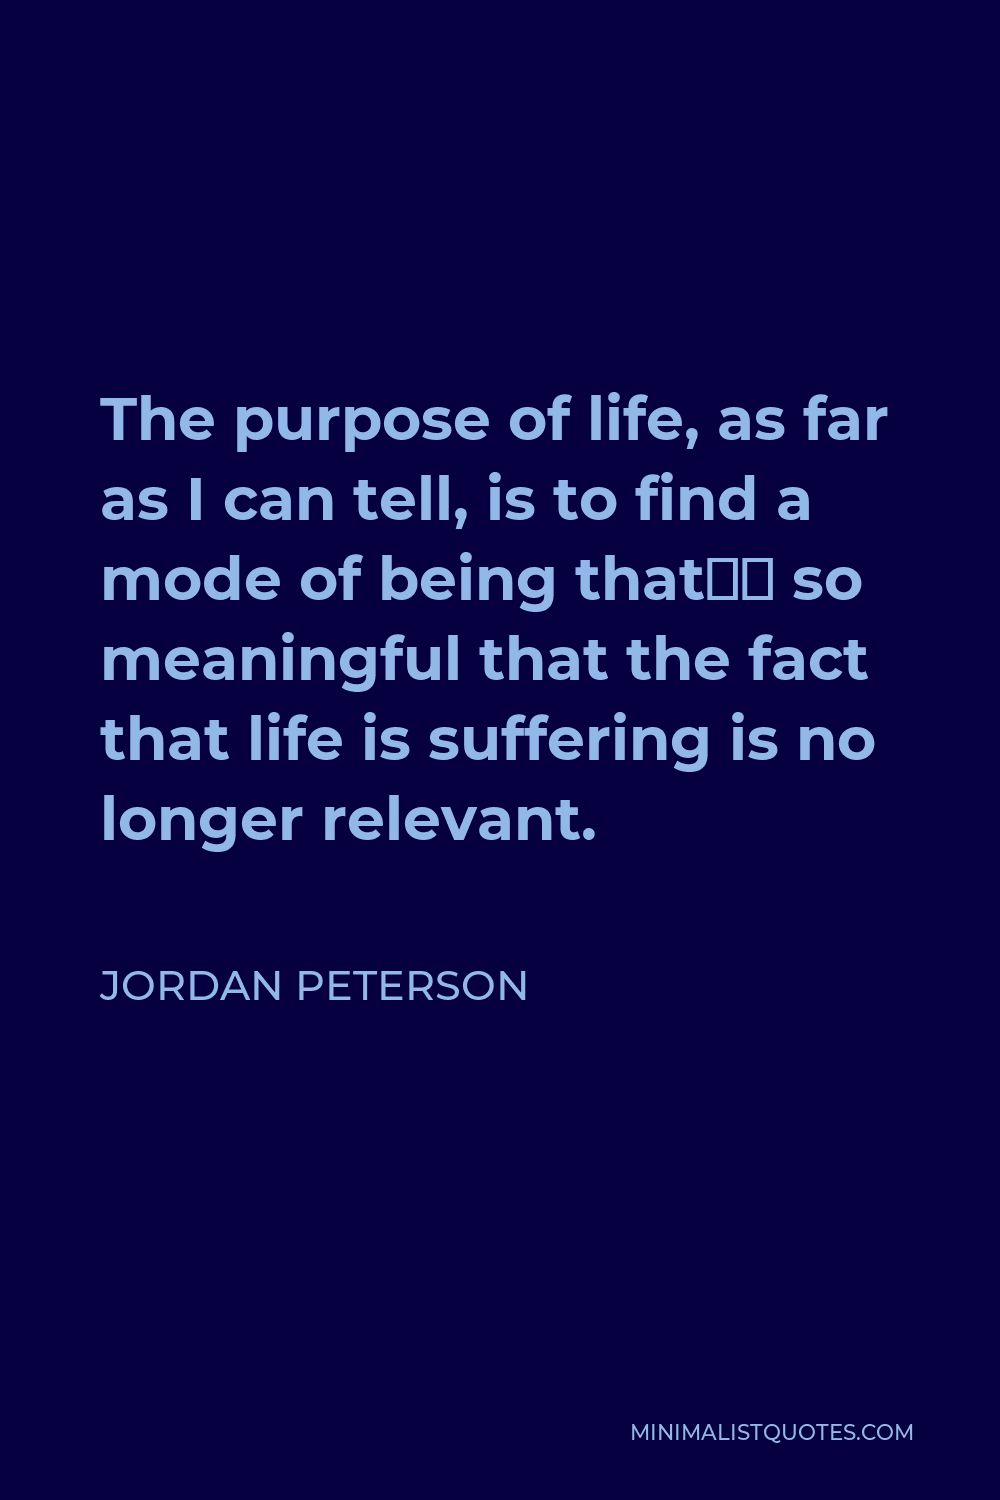 Jordan Peterson Quote - The purpose of life, as far as I can tell, is to find a mode of being that’s so meaningful that the fact that life is suffering is no longer relevant.